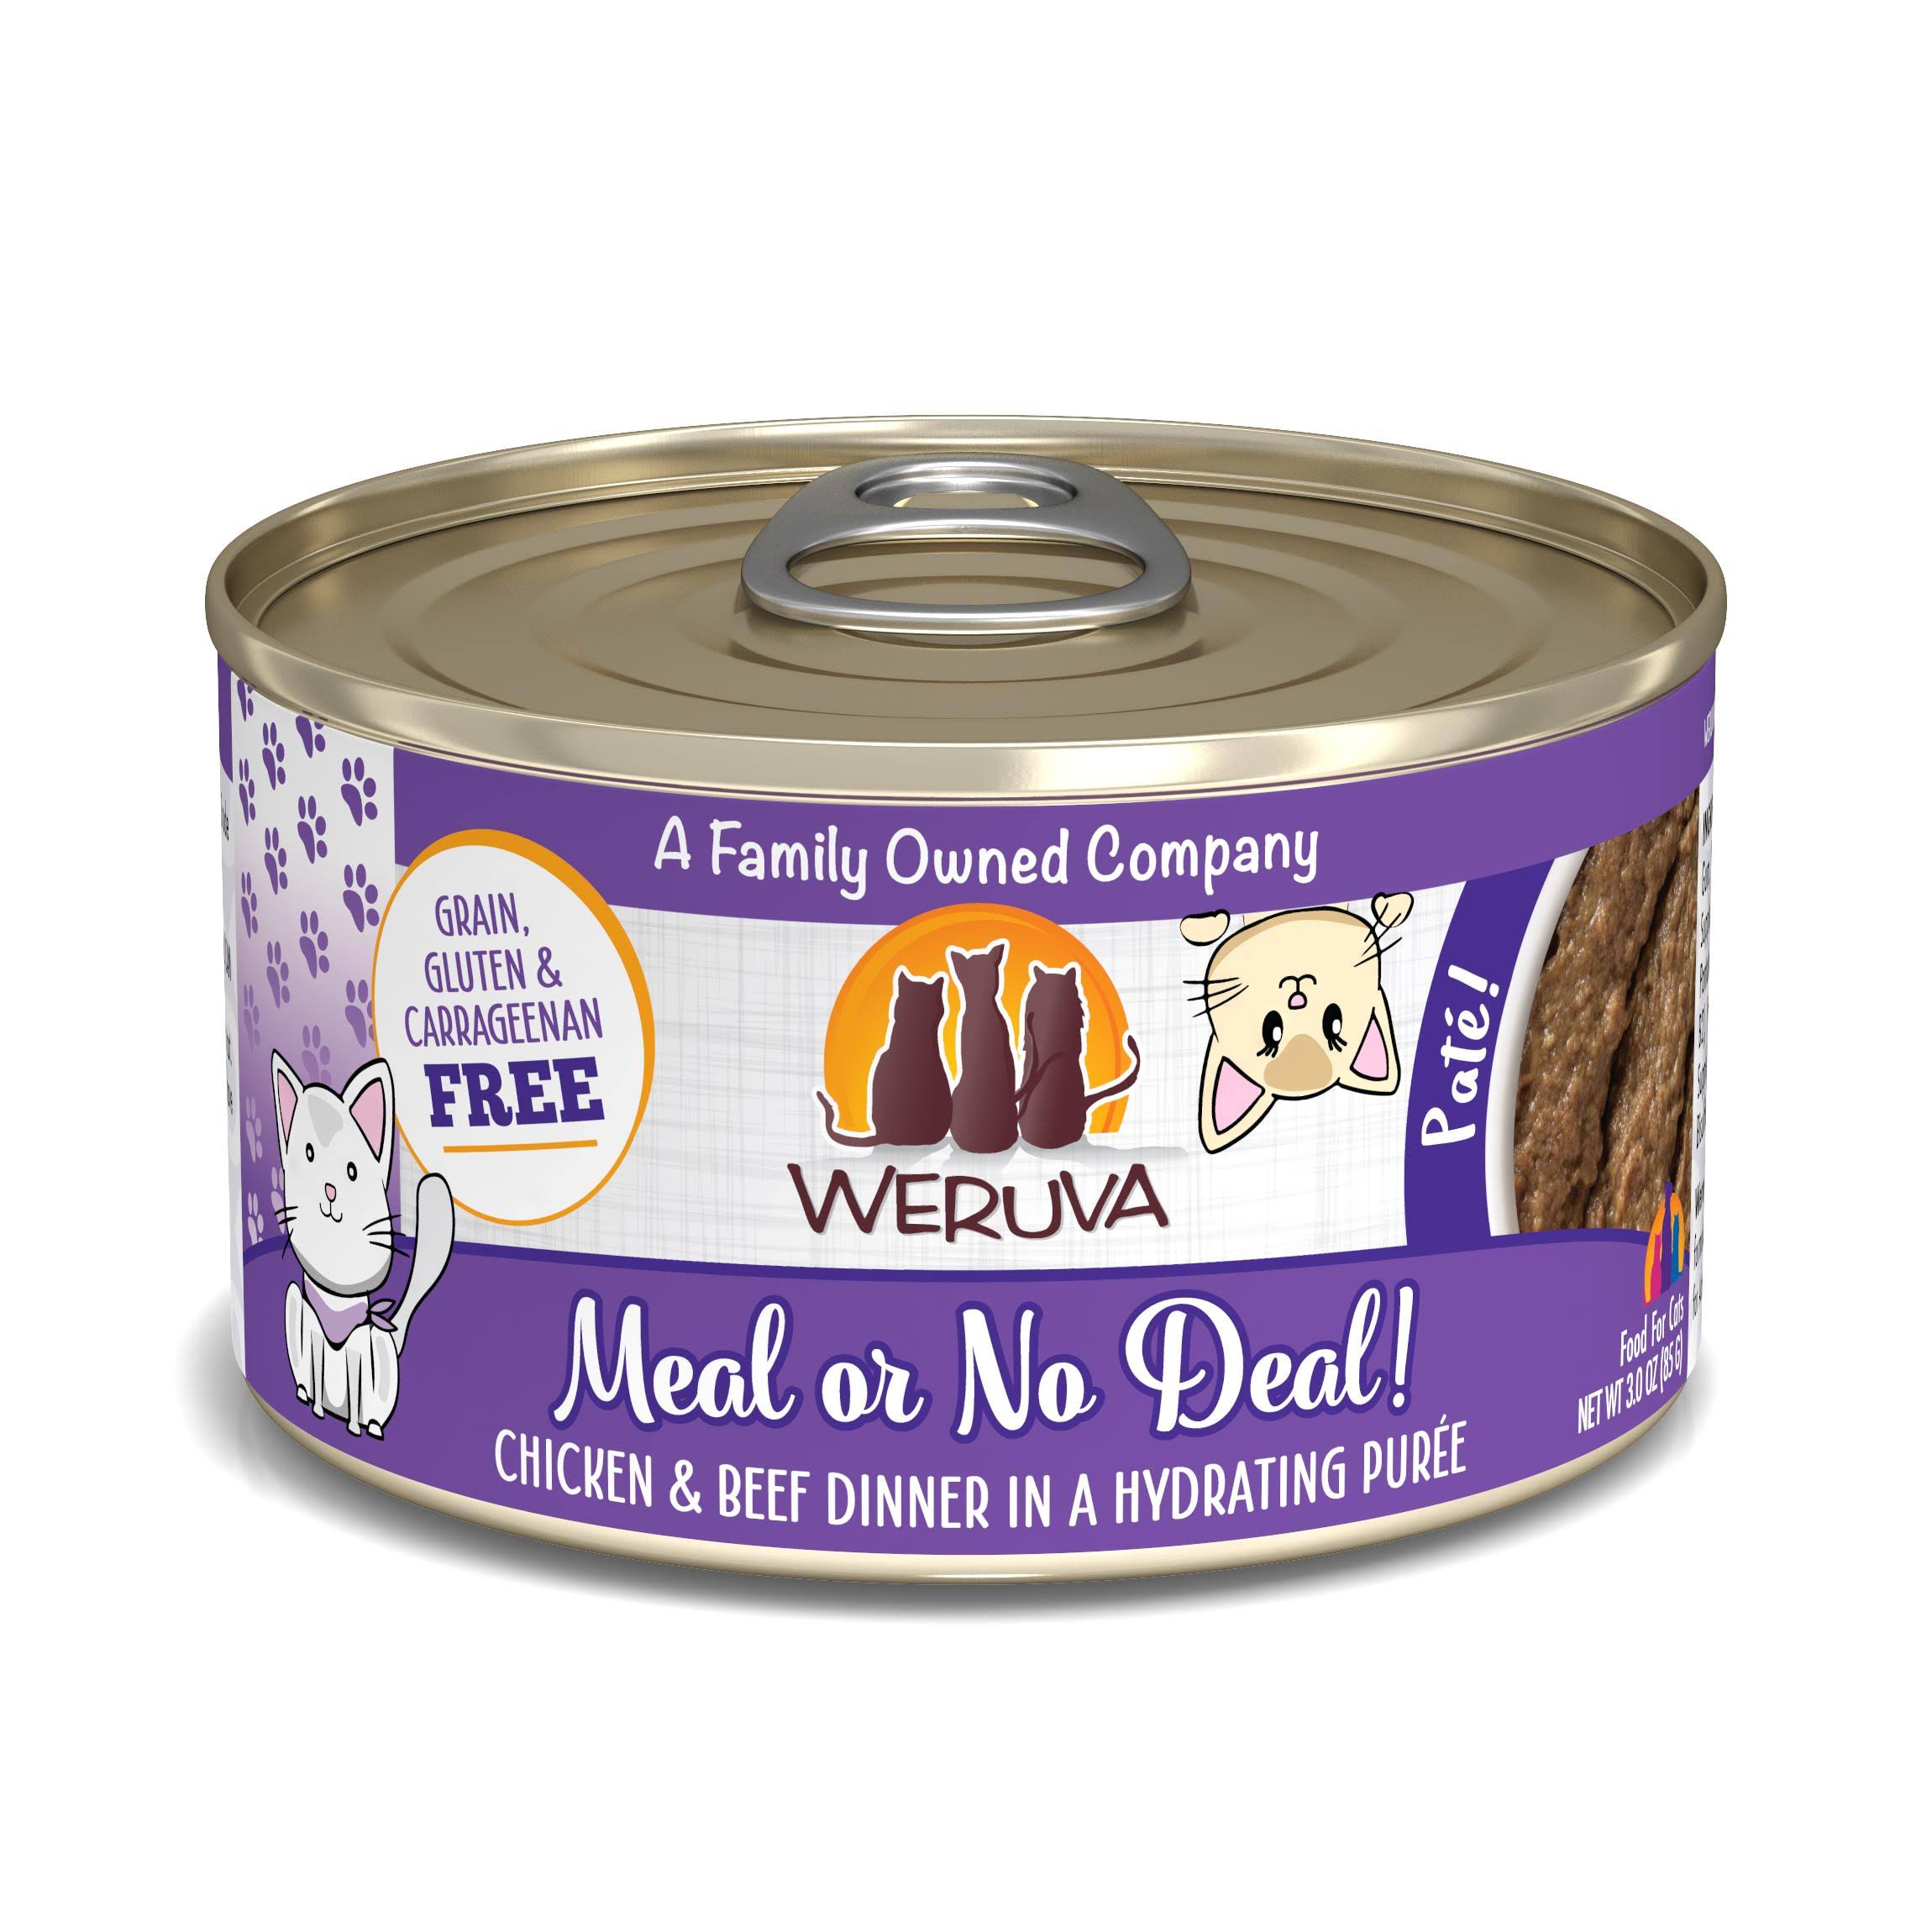 Weruva Meal or No Deal! Chicken & Beef Dinner for Cats 3 oz can